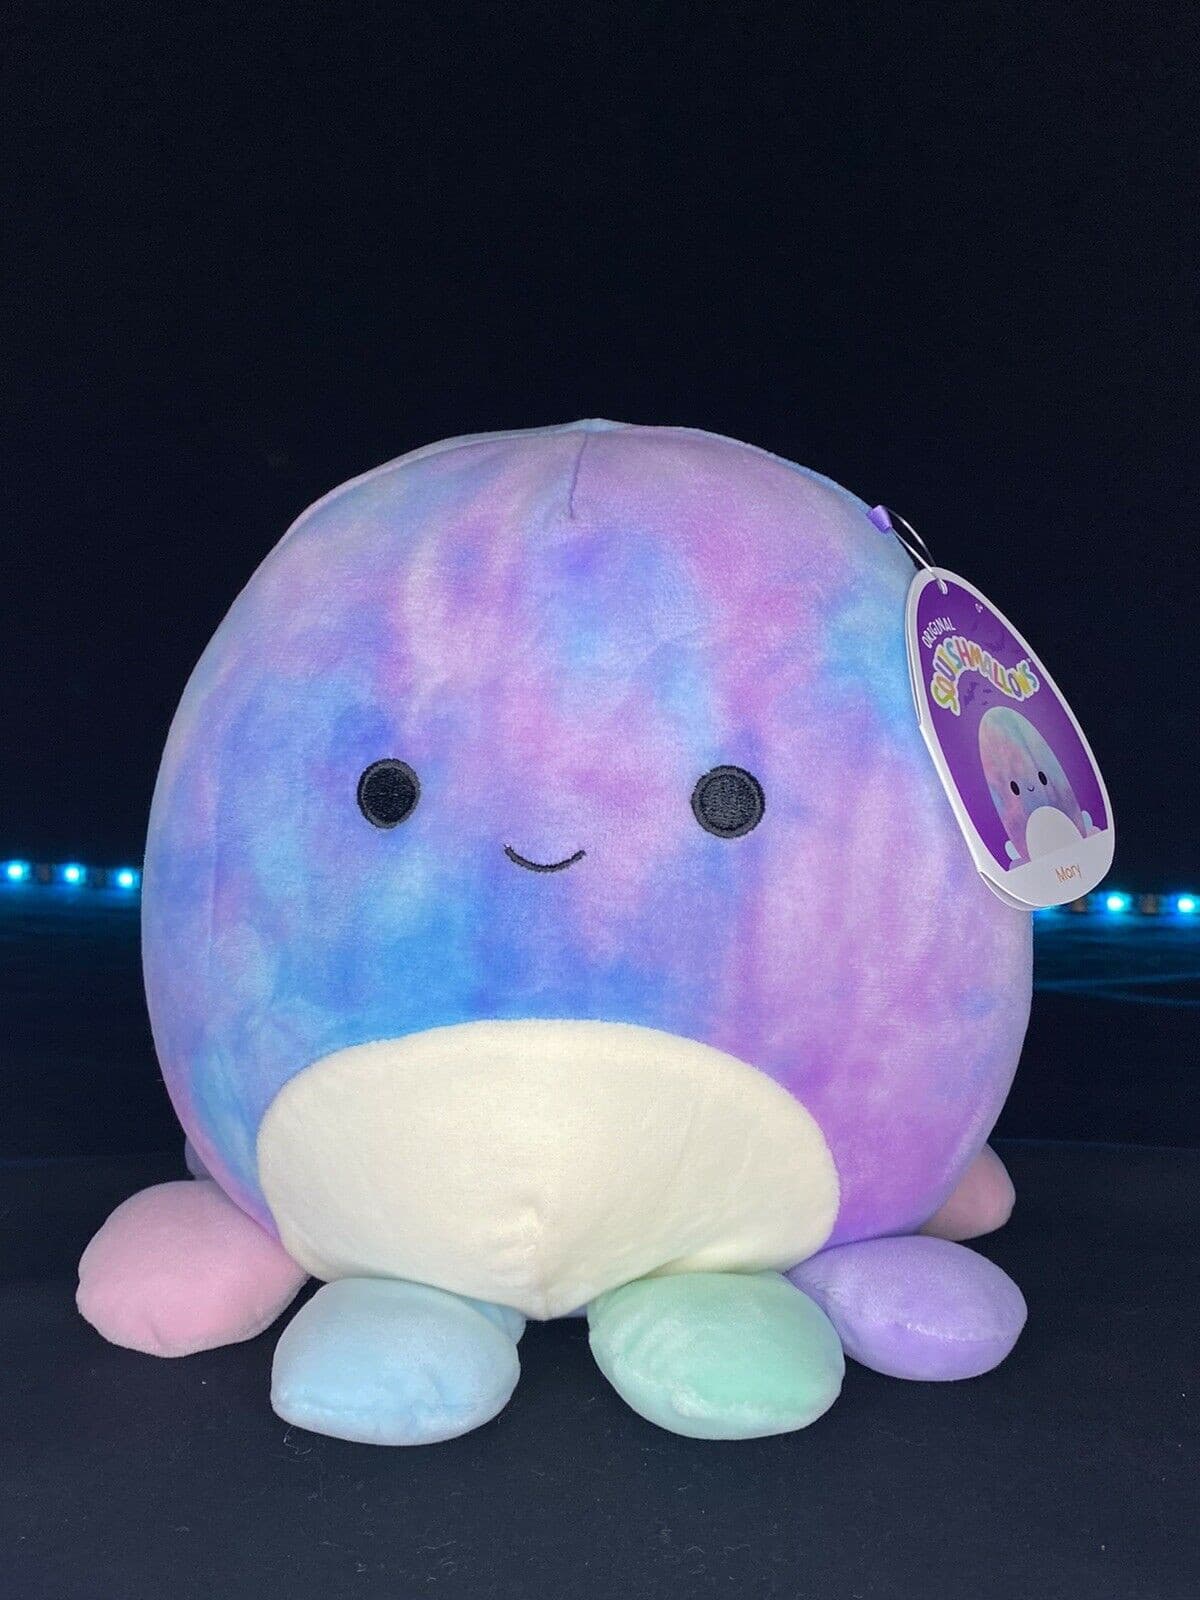 Squishmallows Mary 8” Tie Dye Octopus Plush Toy NWT Super Soft Multicolor Feet | Sweet Magnolia Charms.